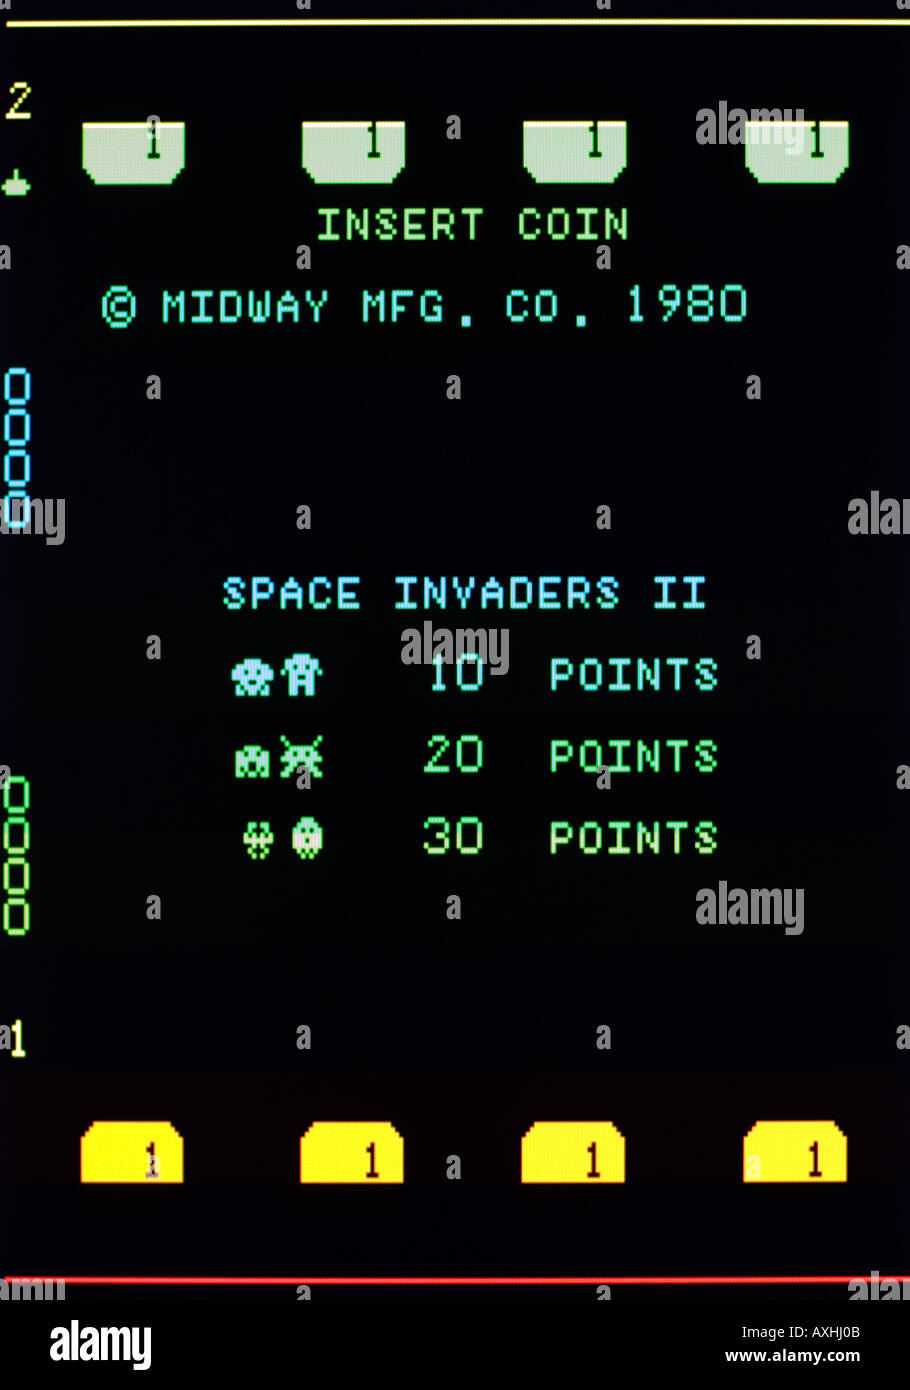 Space Invaders II 2 Midway Mfg Co 1980 Vintage arcade videogame screen shot - EDITORIAL USE ONLY Stock Photo